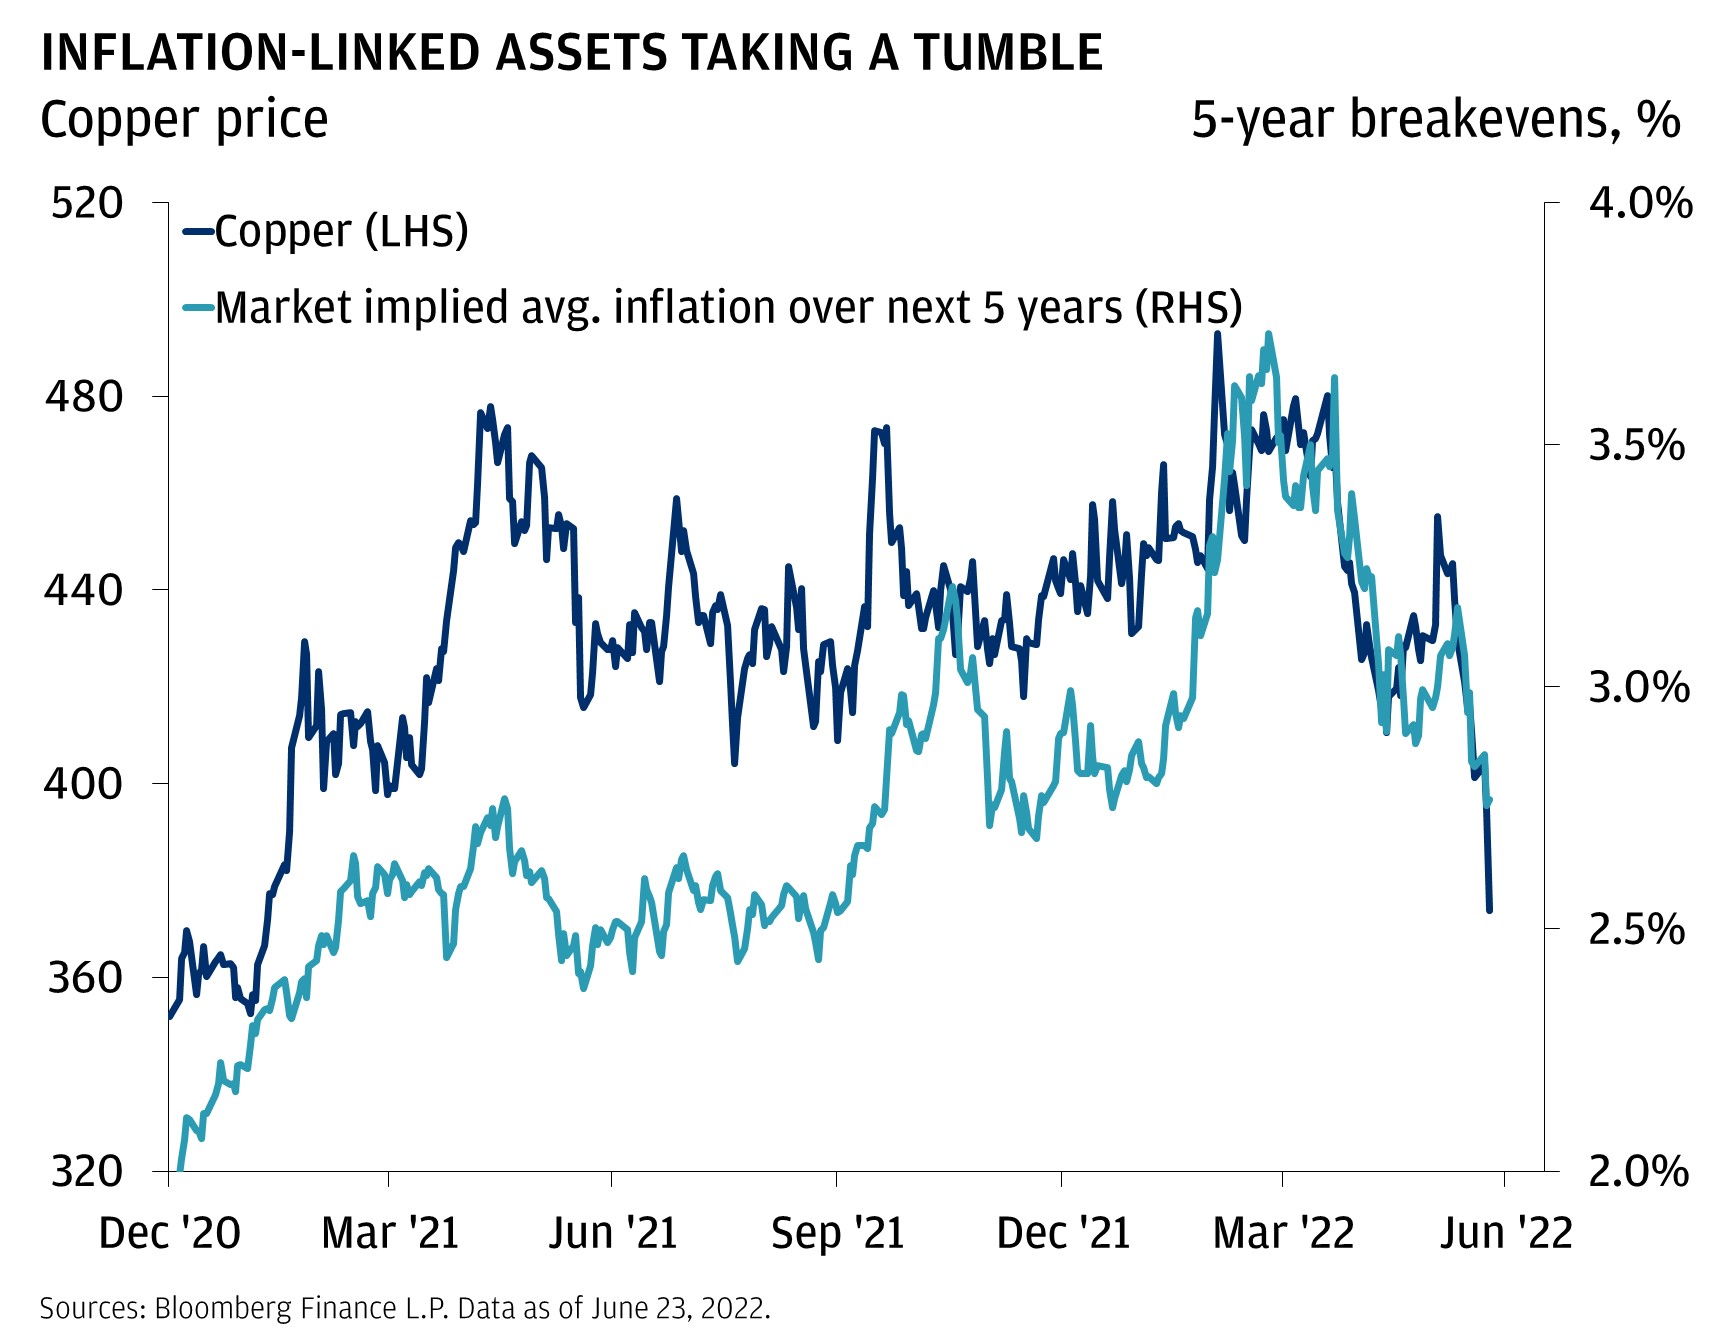 This chart shows the 5-year breakevens (or 5-year market implied inflation expectations) and copper price from January 2021 to June 2022.